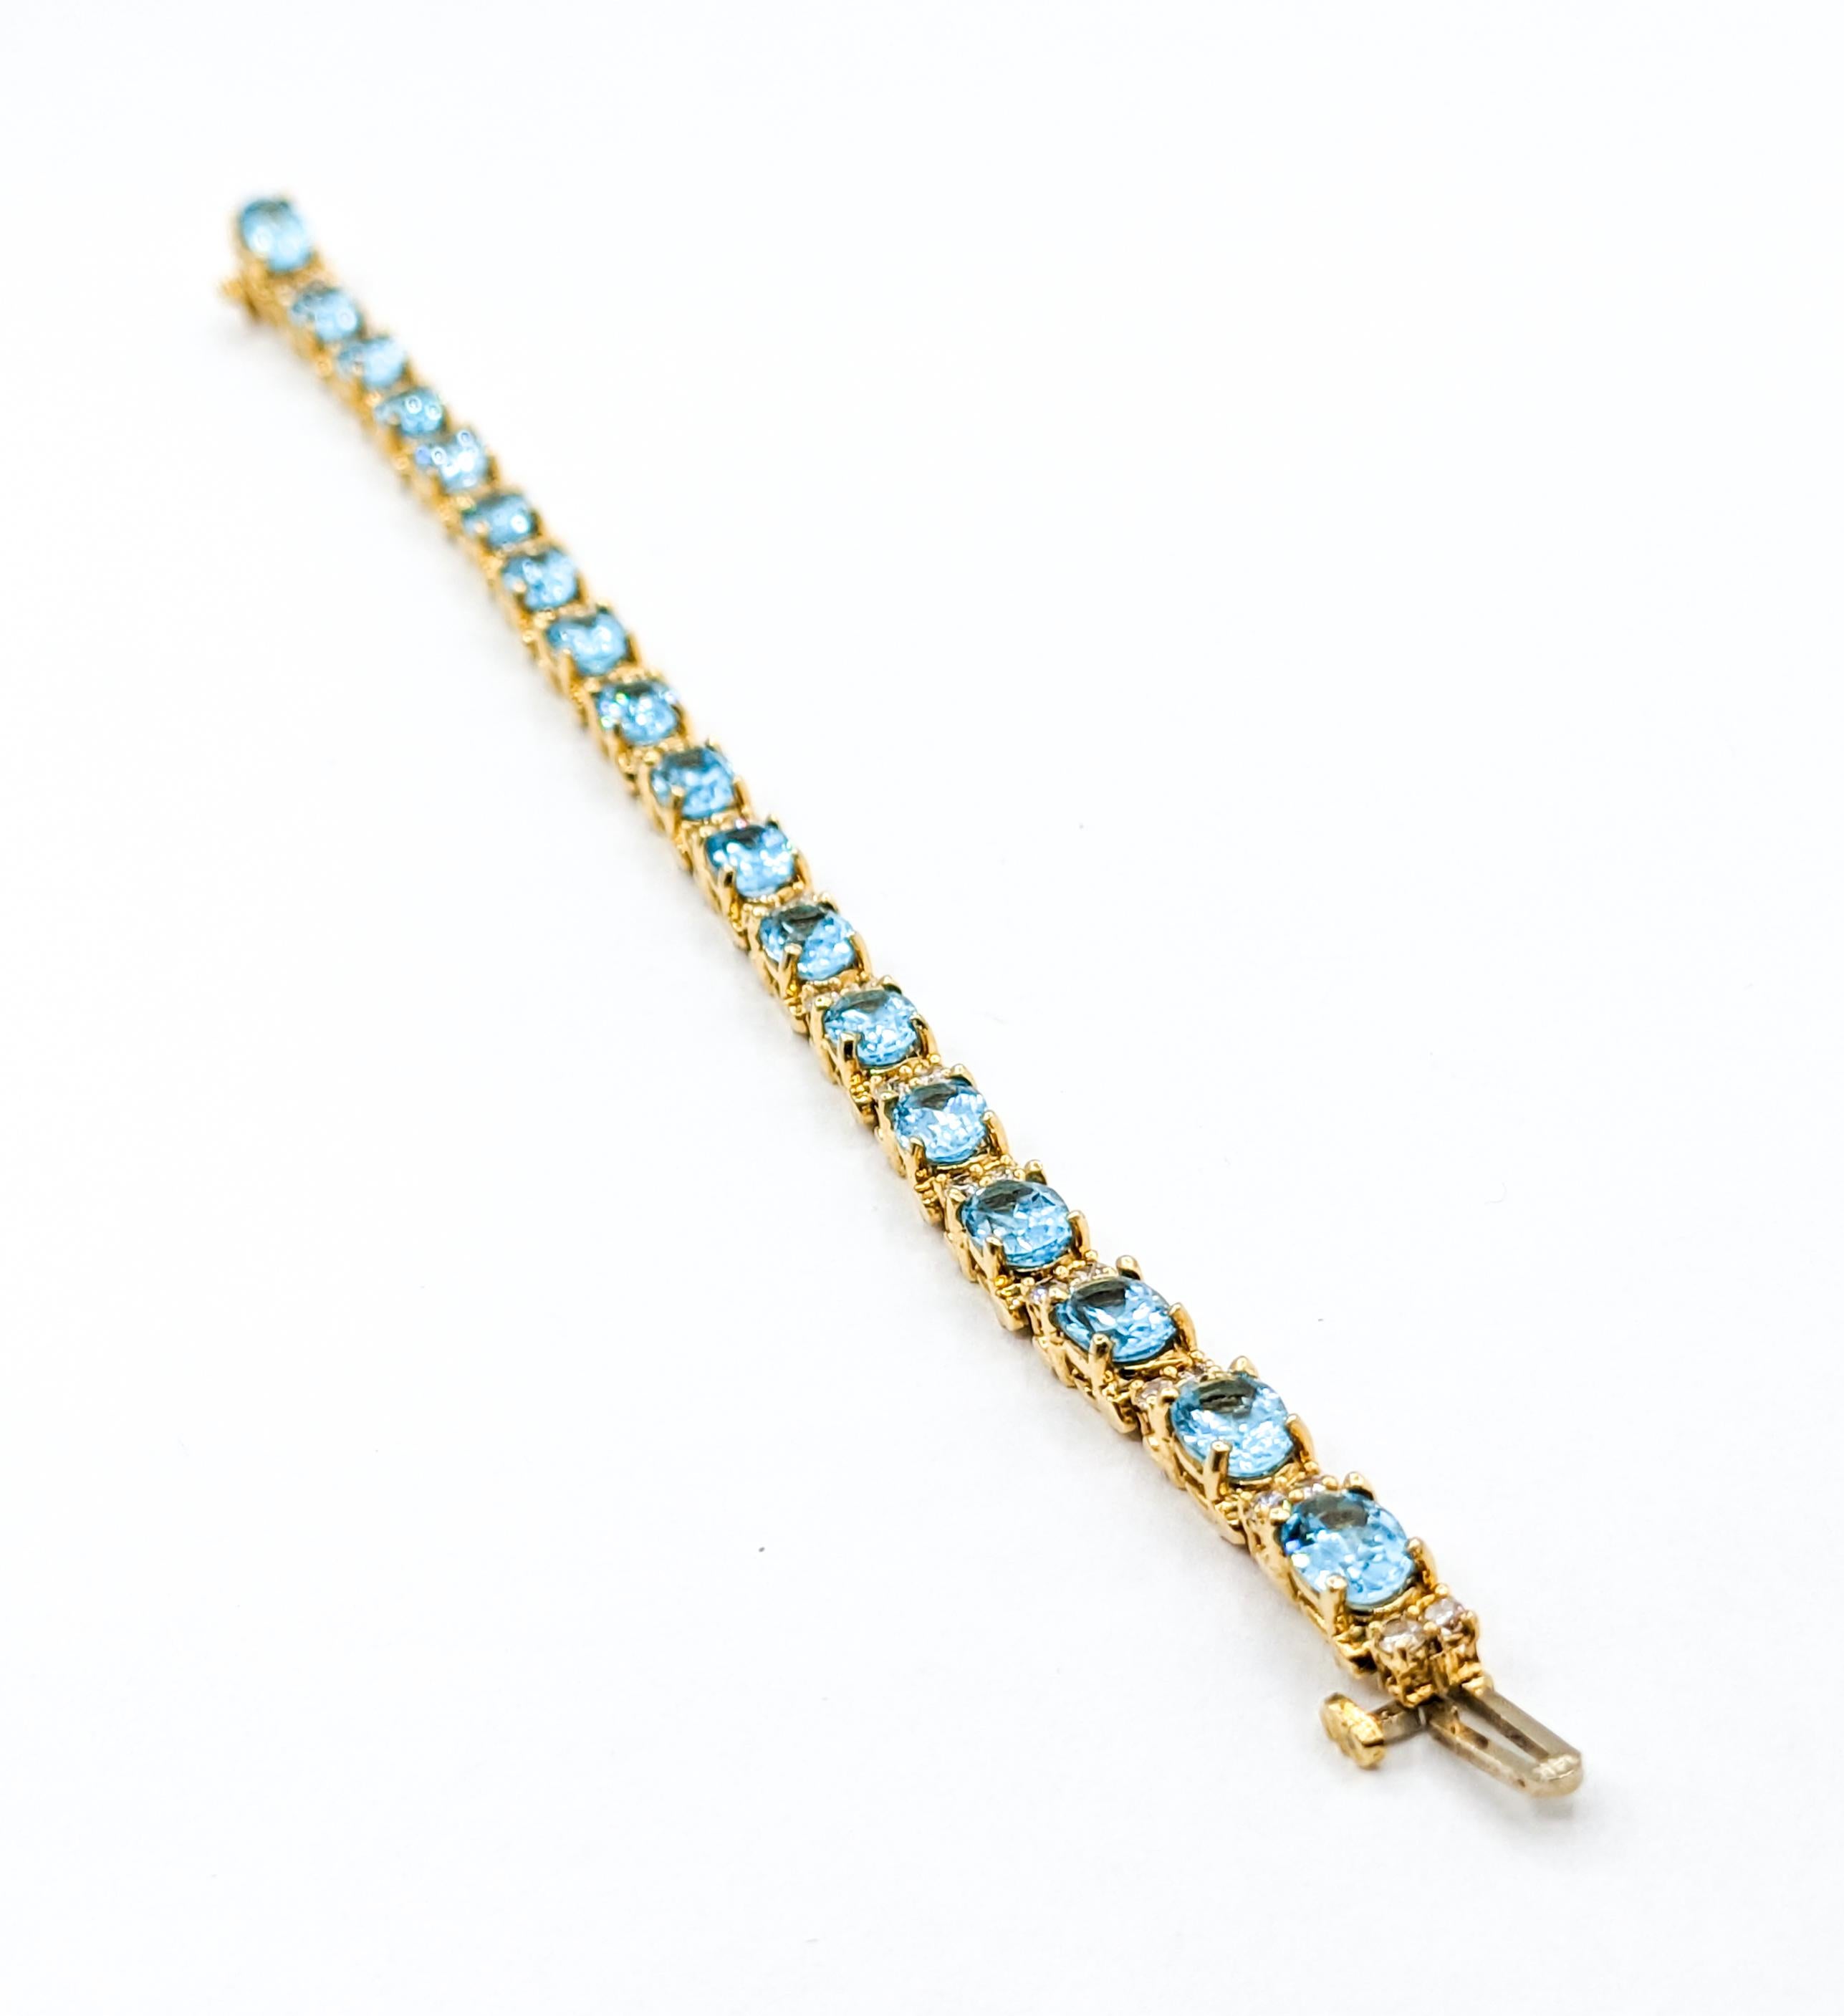 Classy Diamond & Blue Topaz Tennis Bracelet in Gold In Excellent Condition For Sale In Bloomington, MN